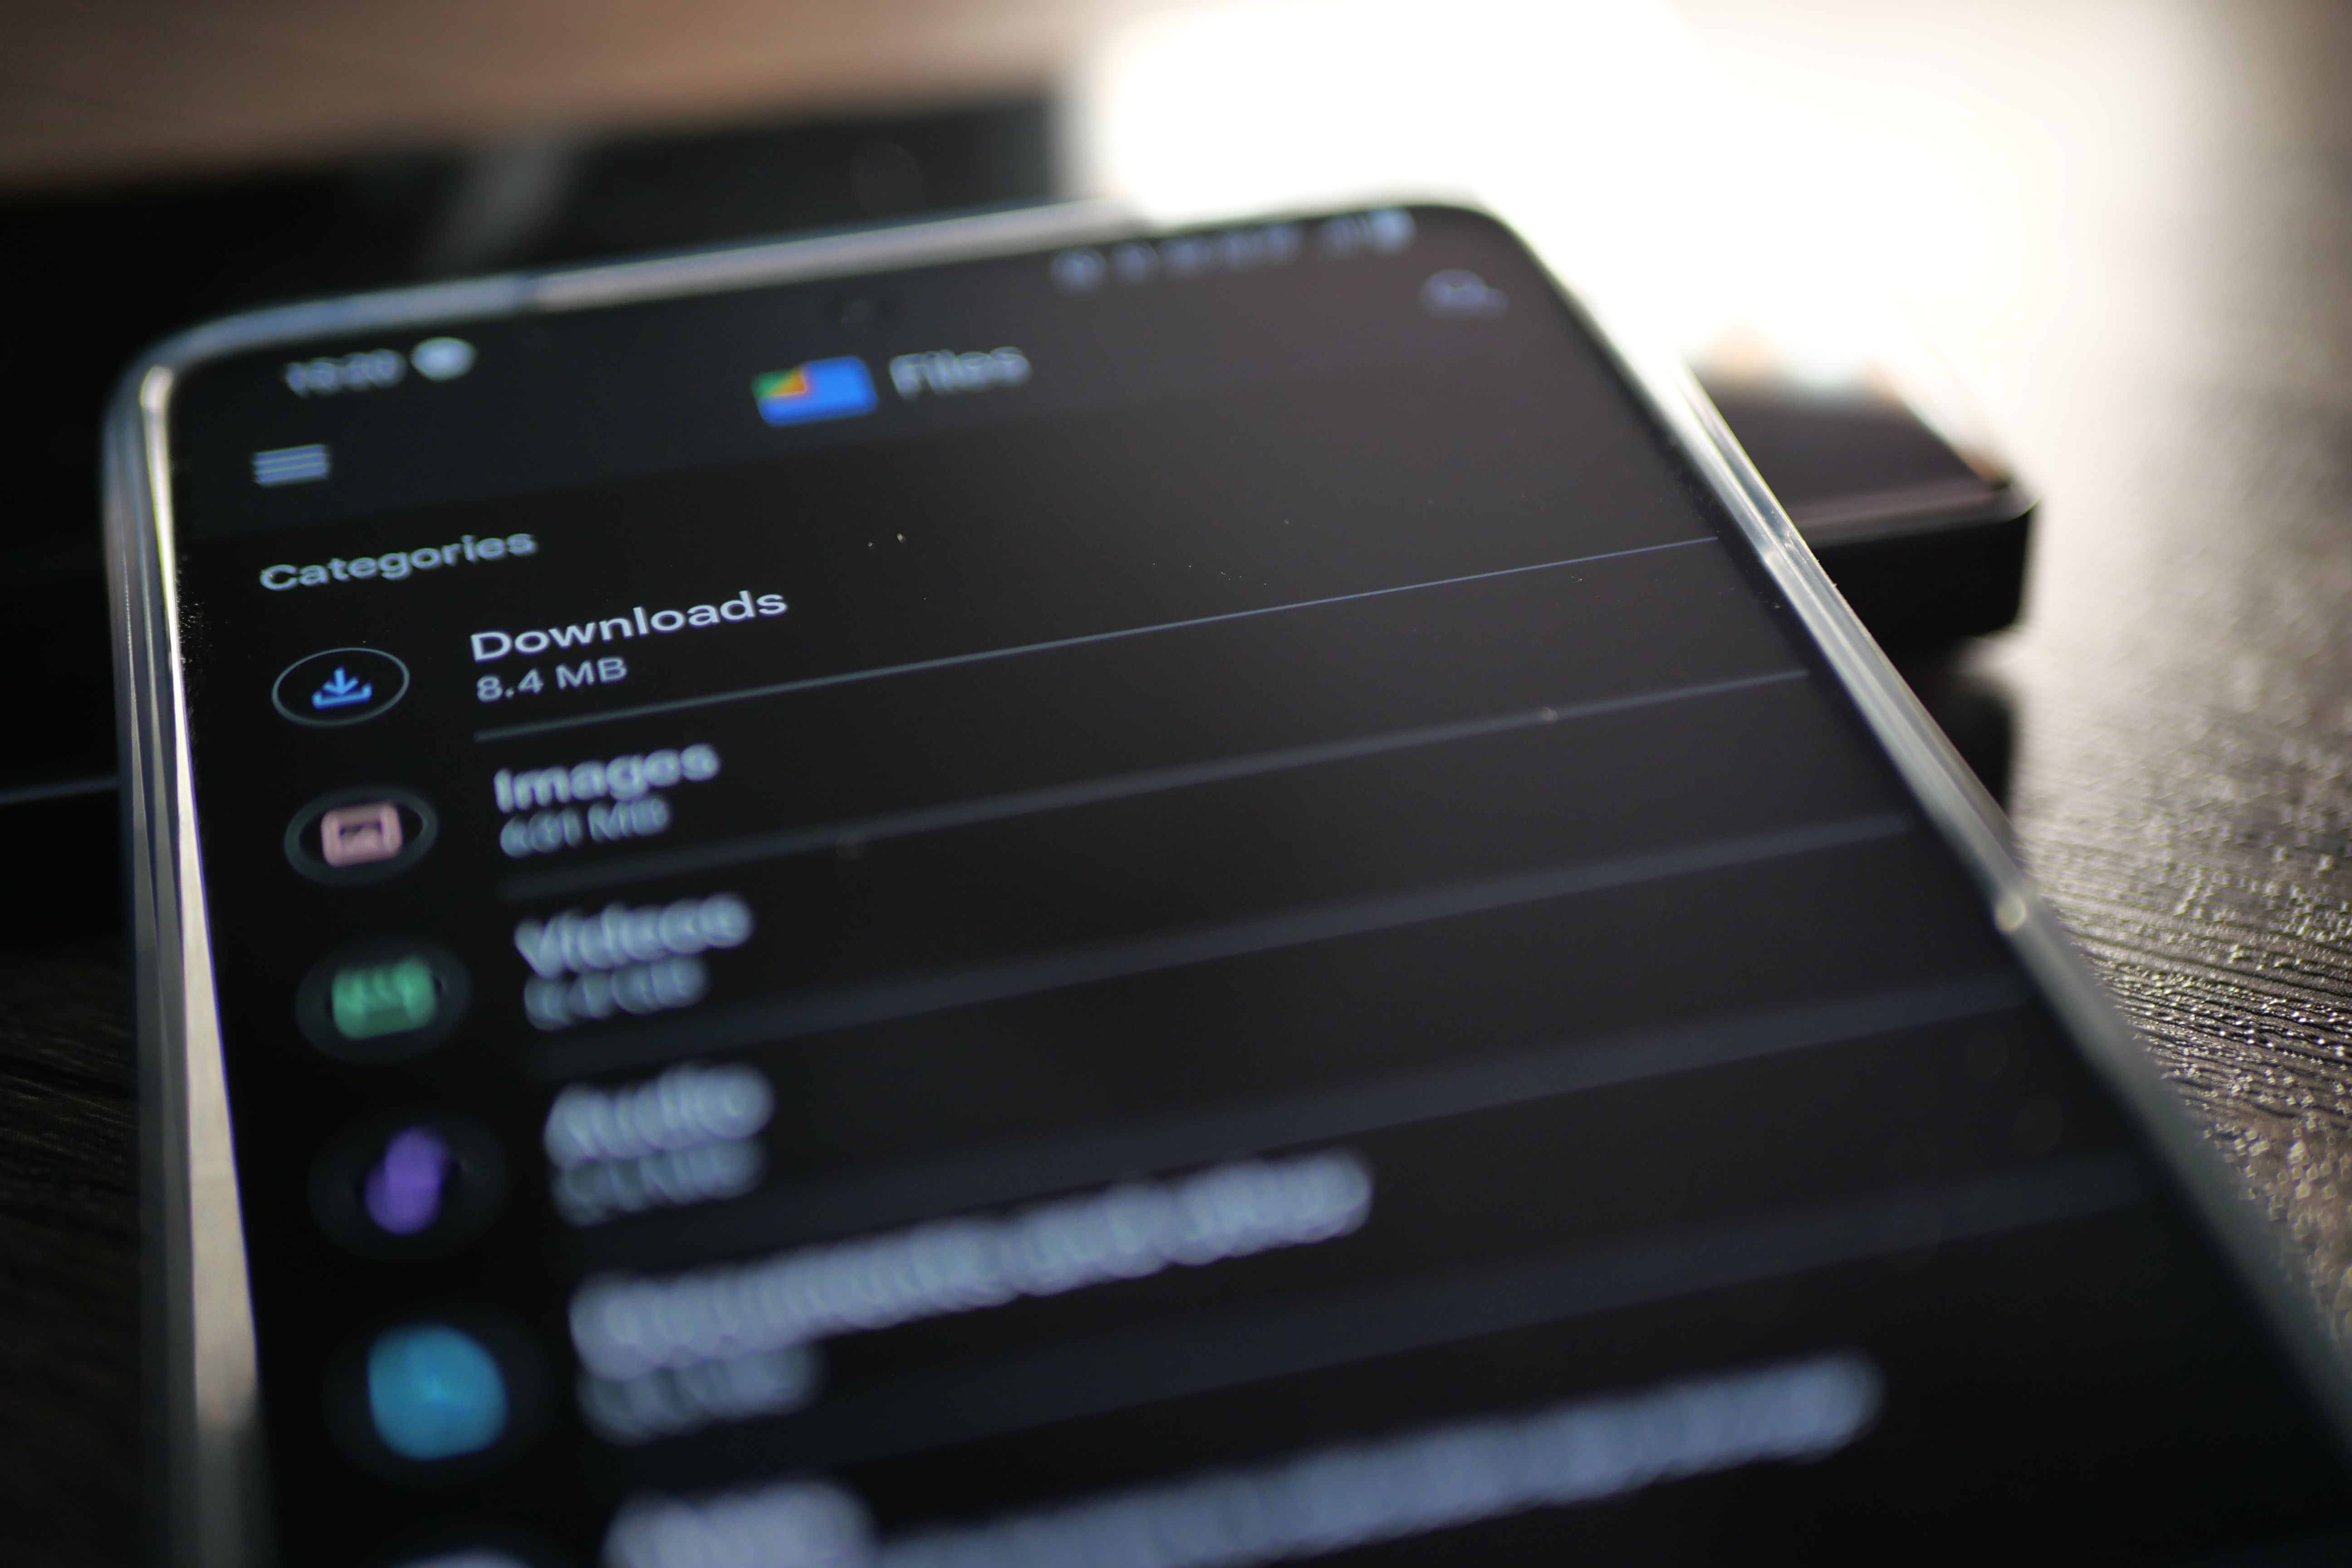 How to get to the downloads folder on an Android phone